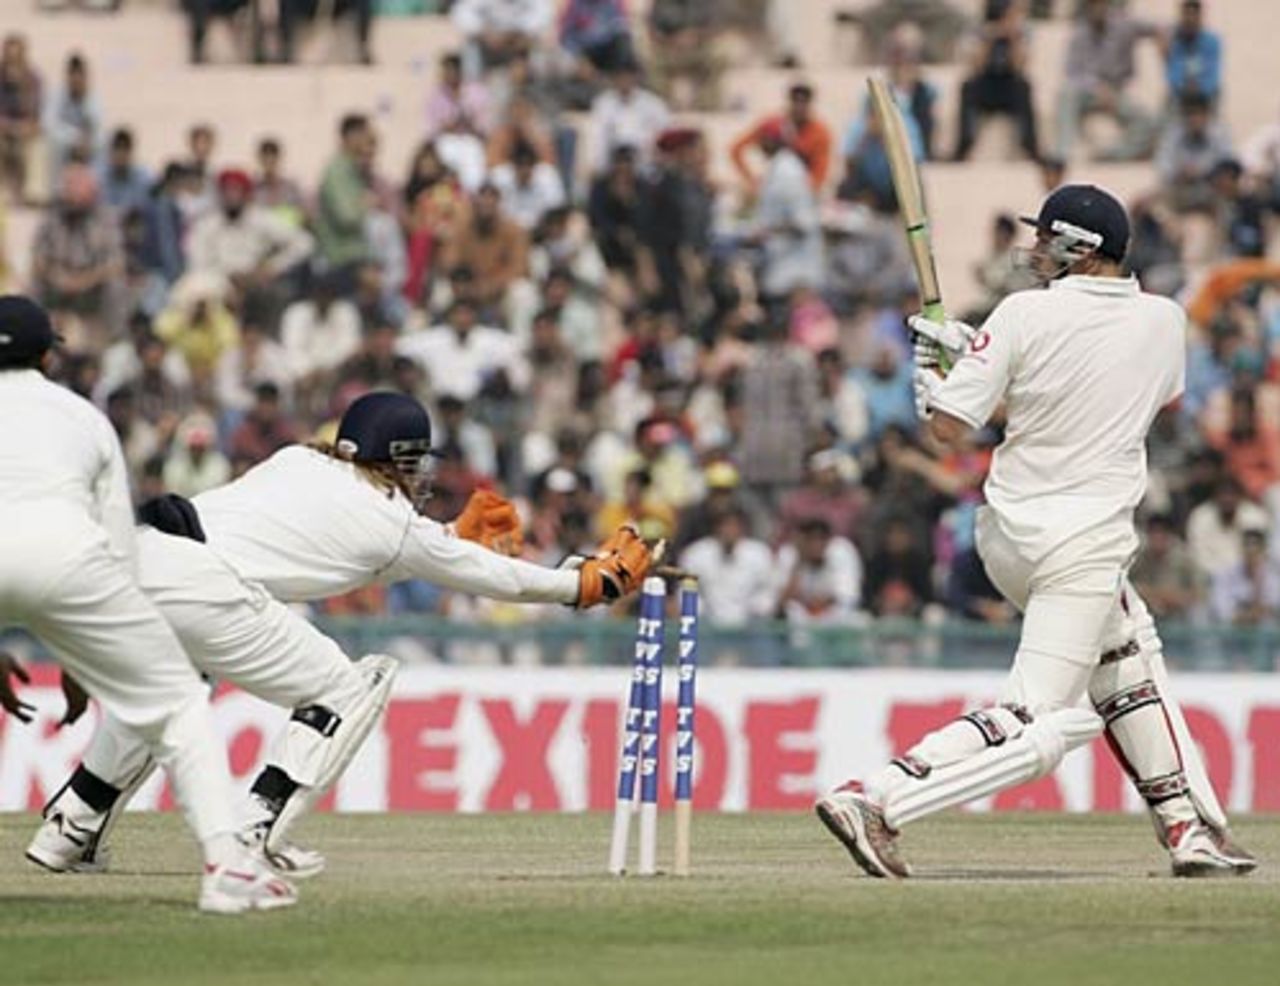 In a flash: Mahendra Singh Dhoni whips off the bails to stump Steve Harmison, India v England, 2nd Test, Mohali, 5th day, March 13 2006